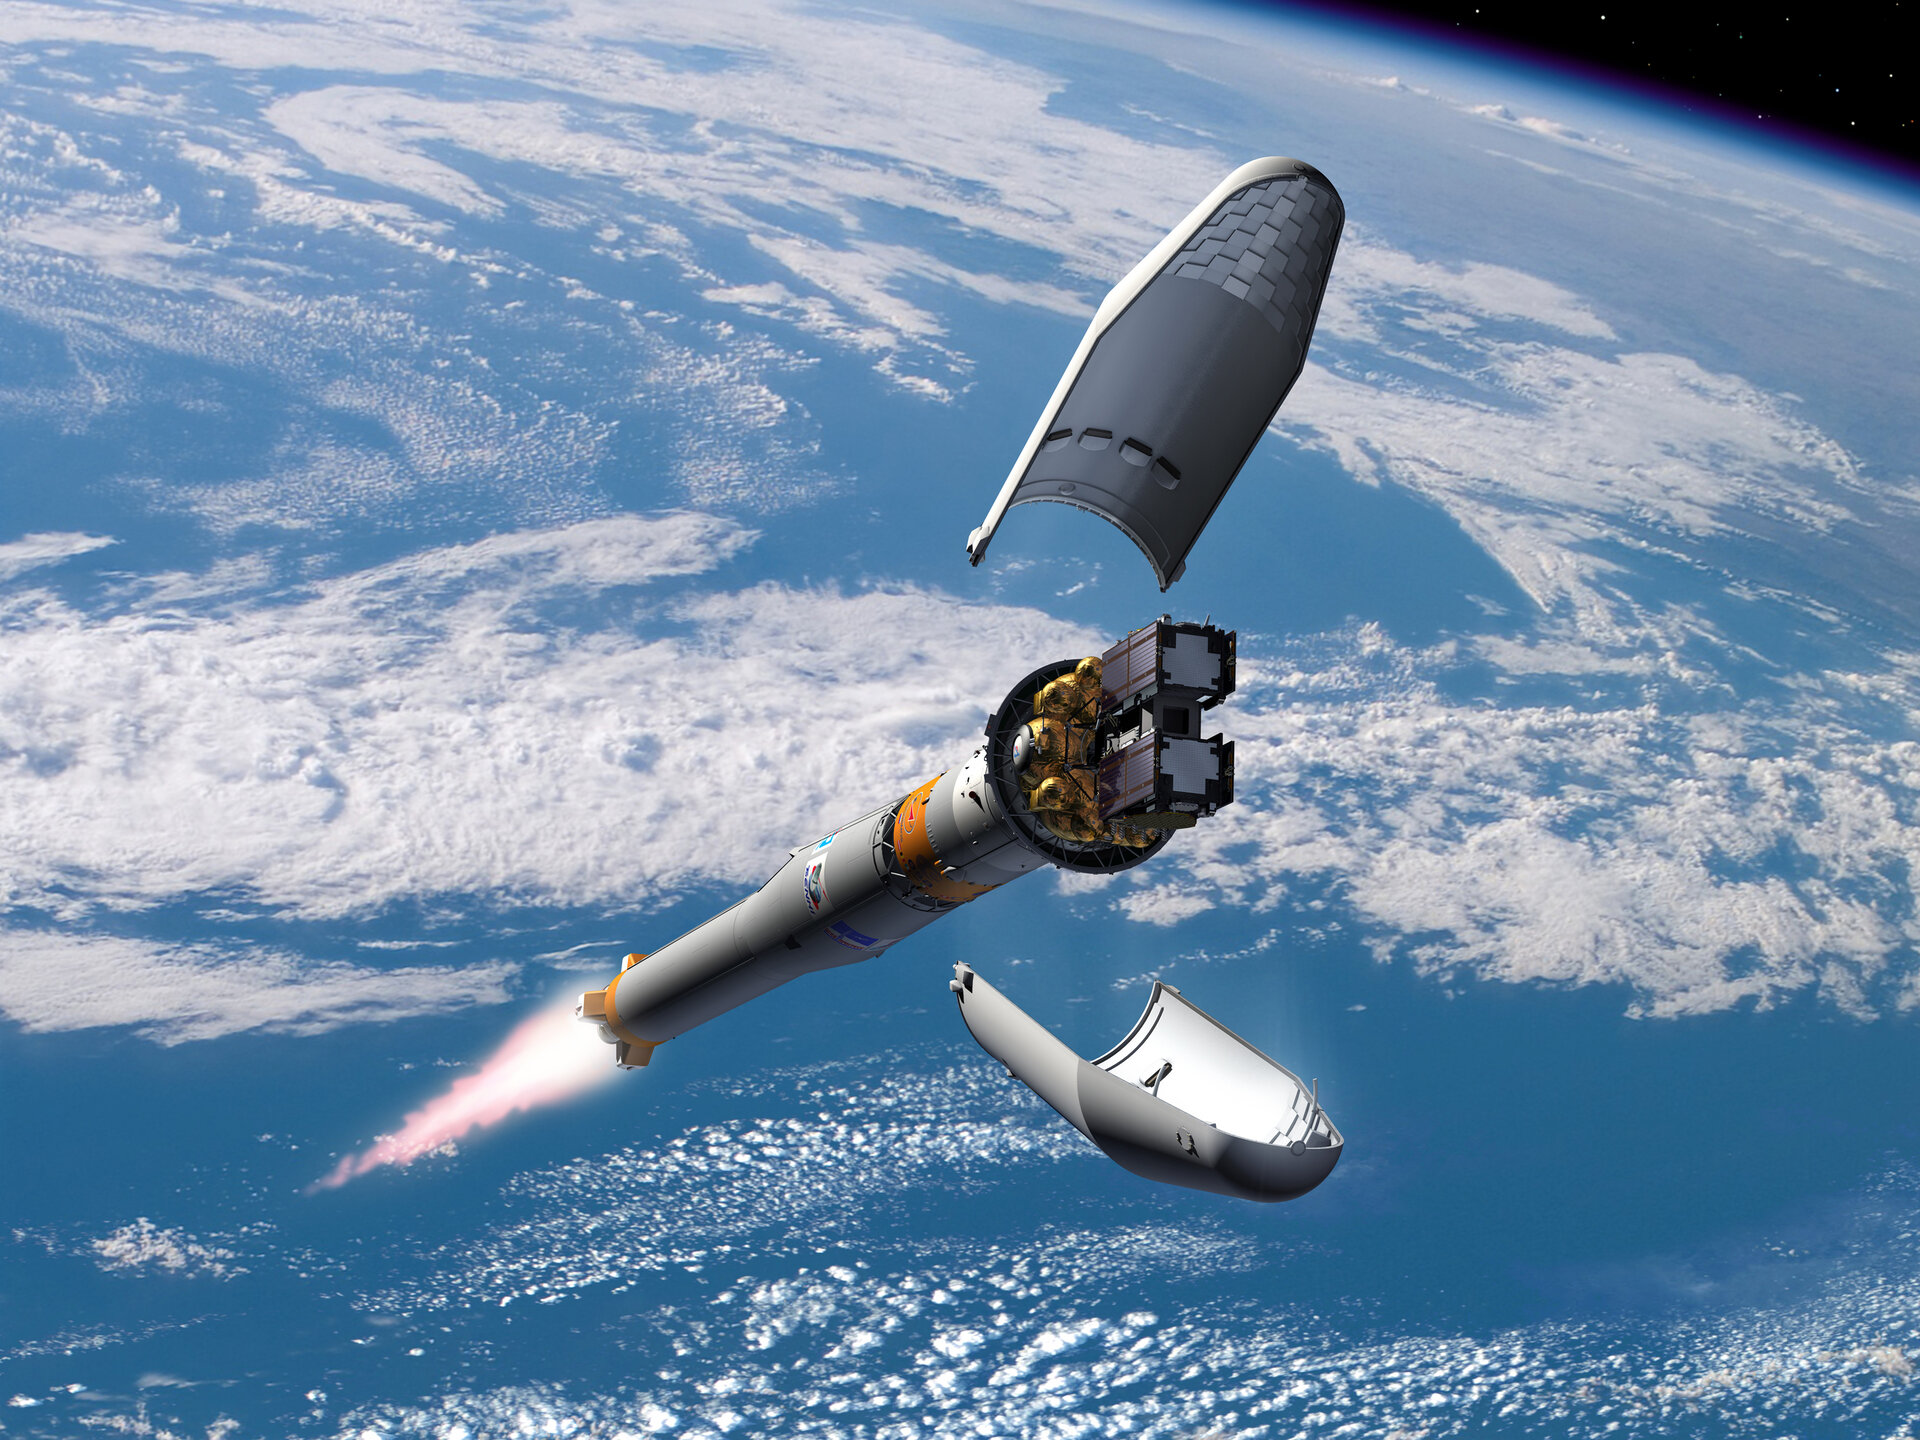 IOV fairing ejection